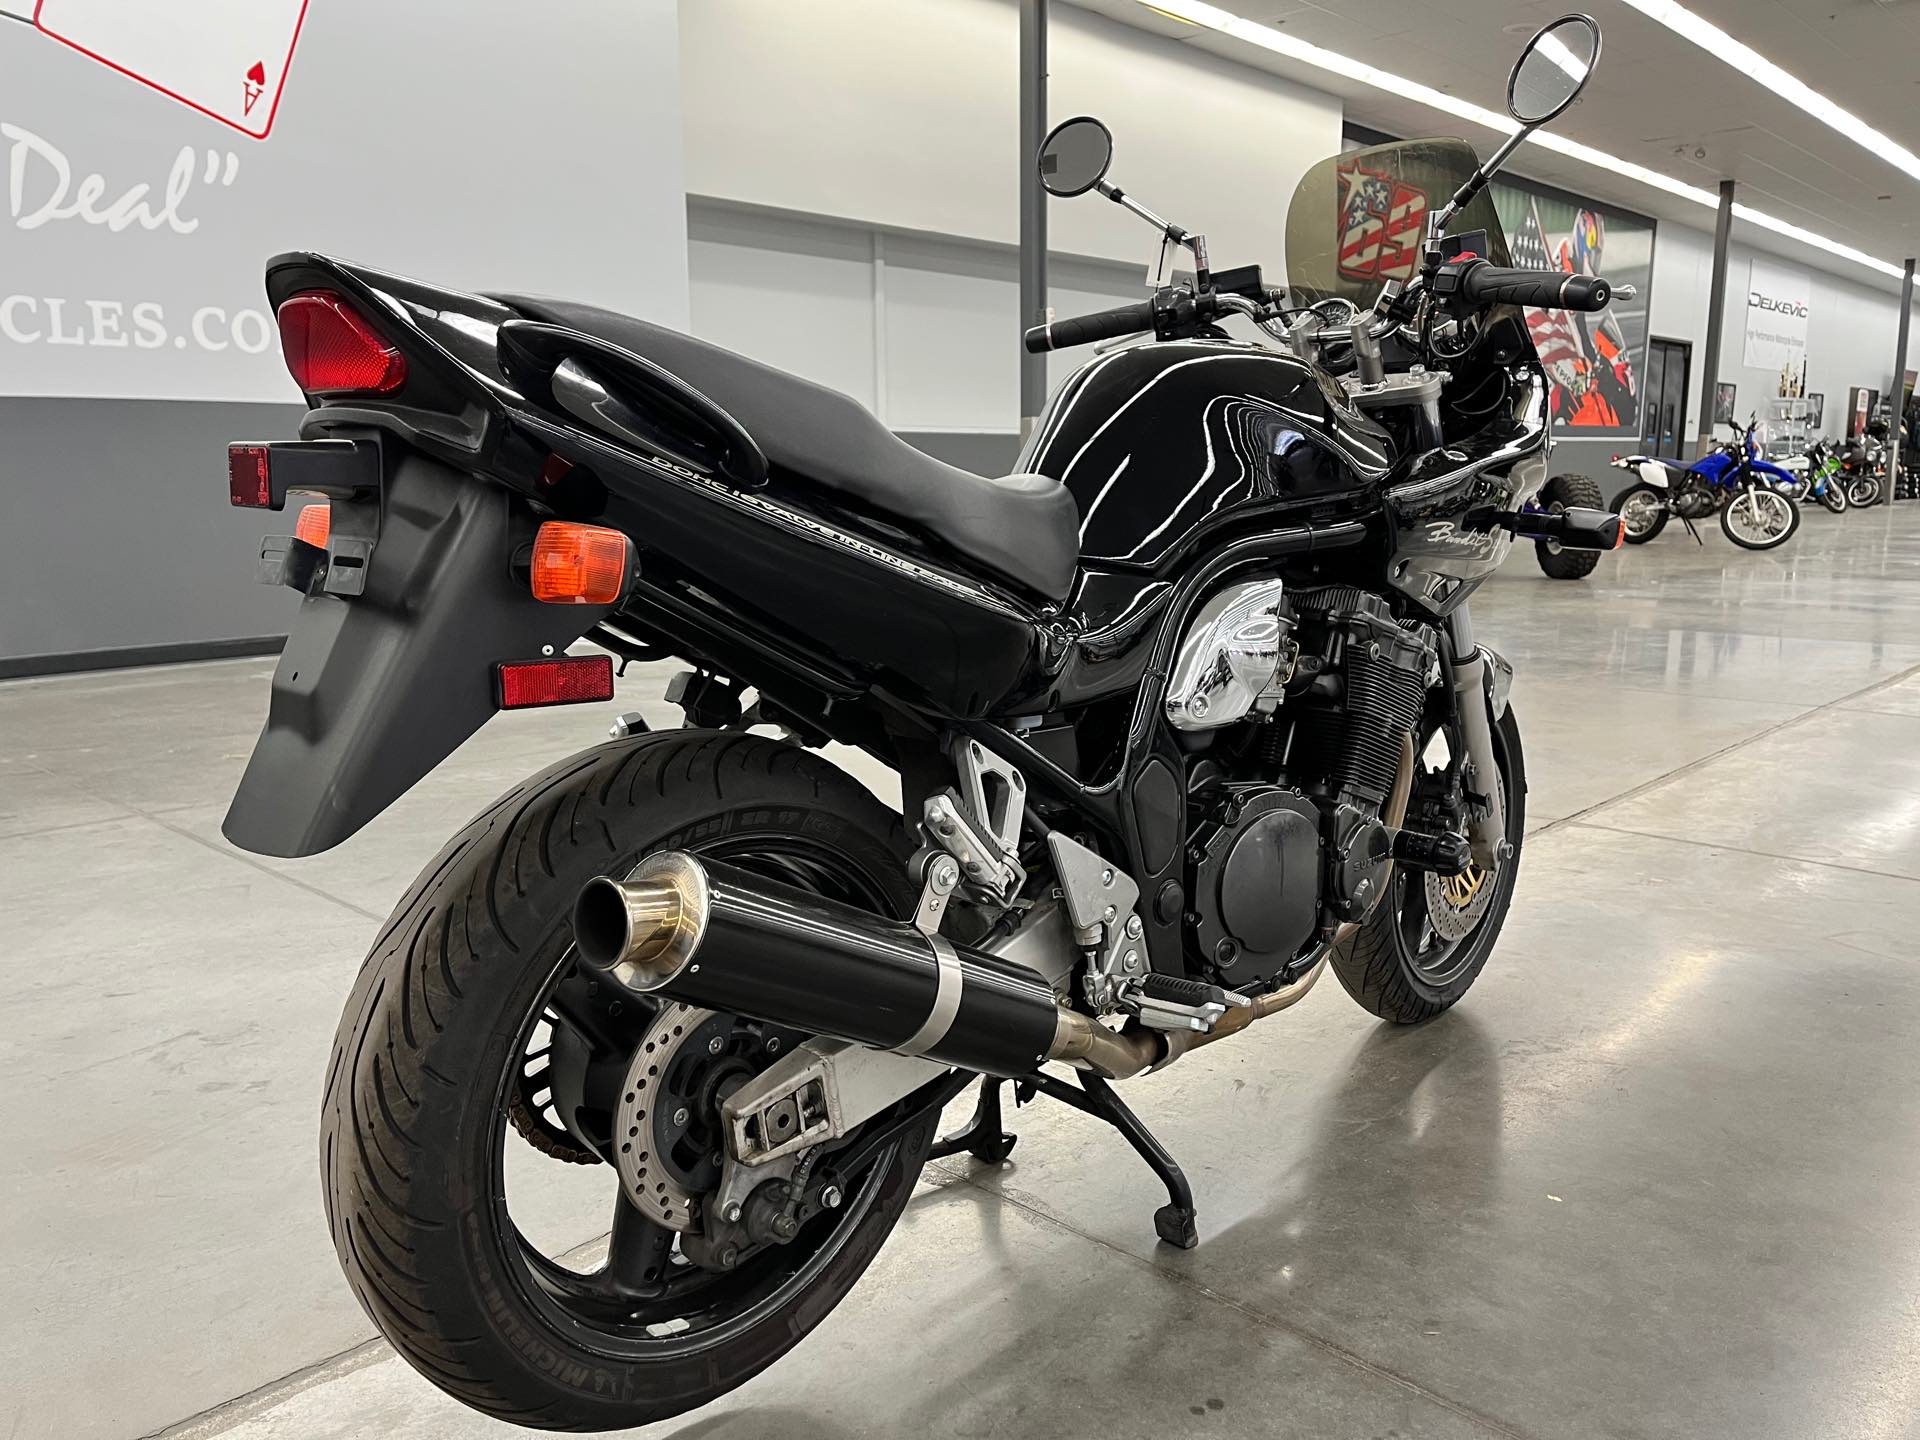 1998 SUZUKI GSF1200S at Aces Motorcycles - Denver